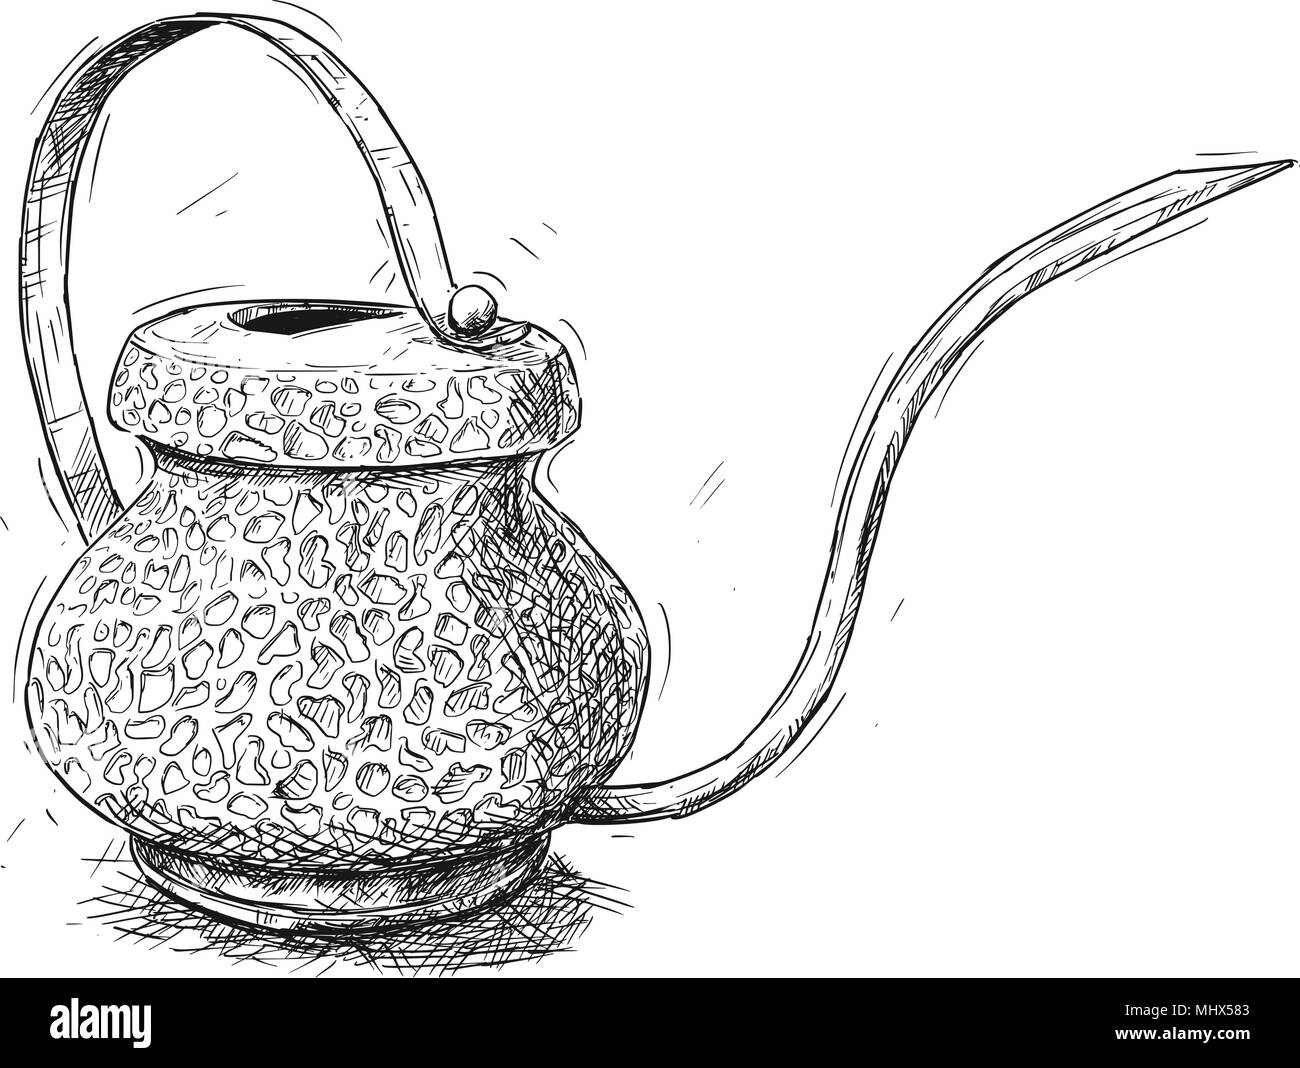 Vector Artistic Illustration or Drawing of Antique Brass Watering Jug or Can Stock Vector